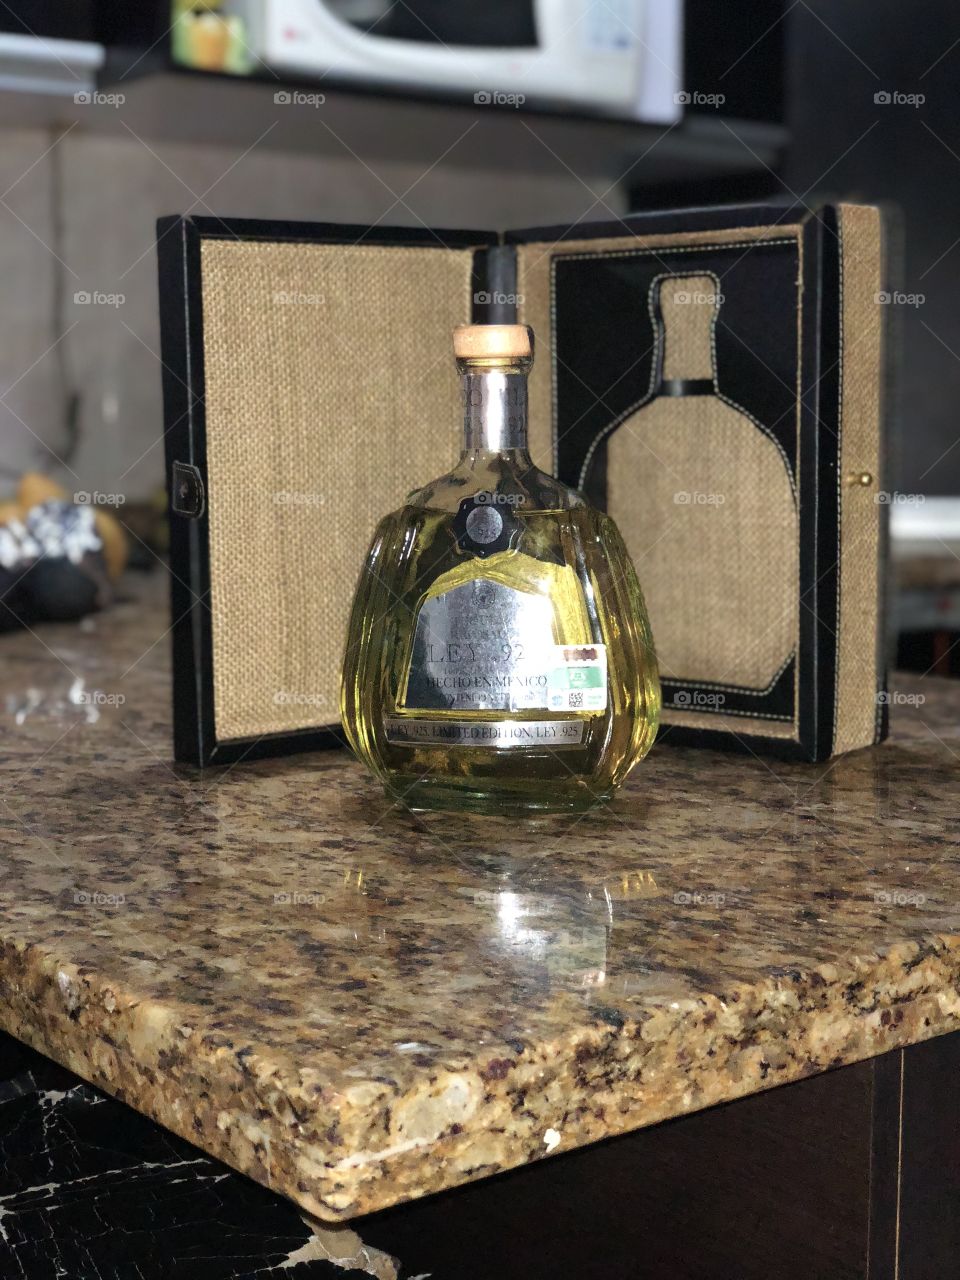 Tequila 925 edition limited